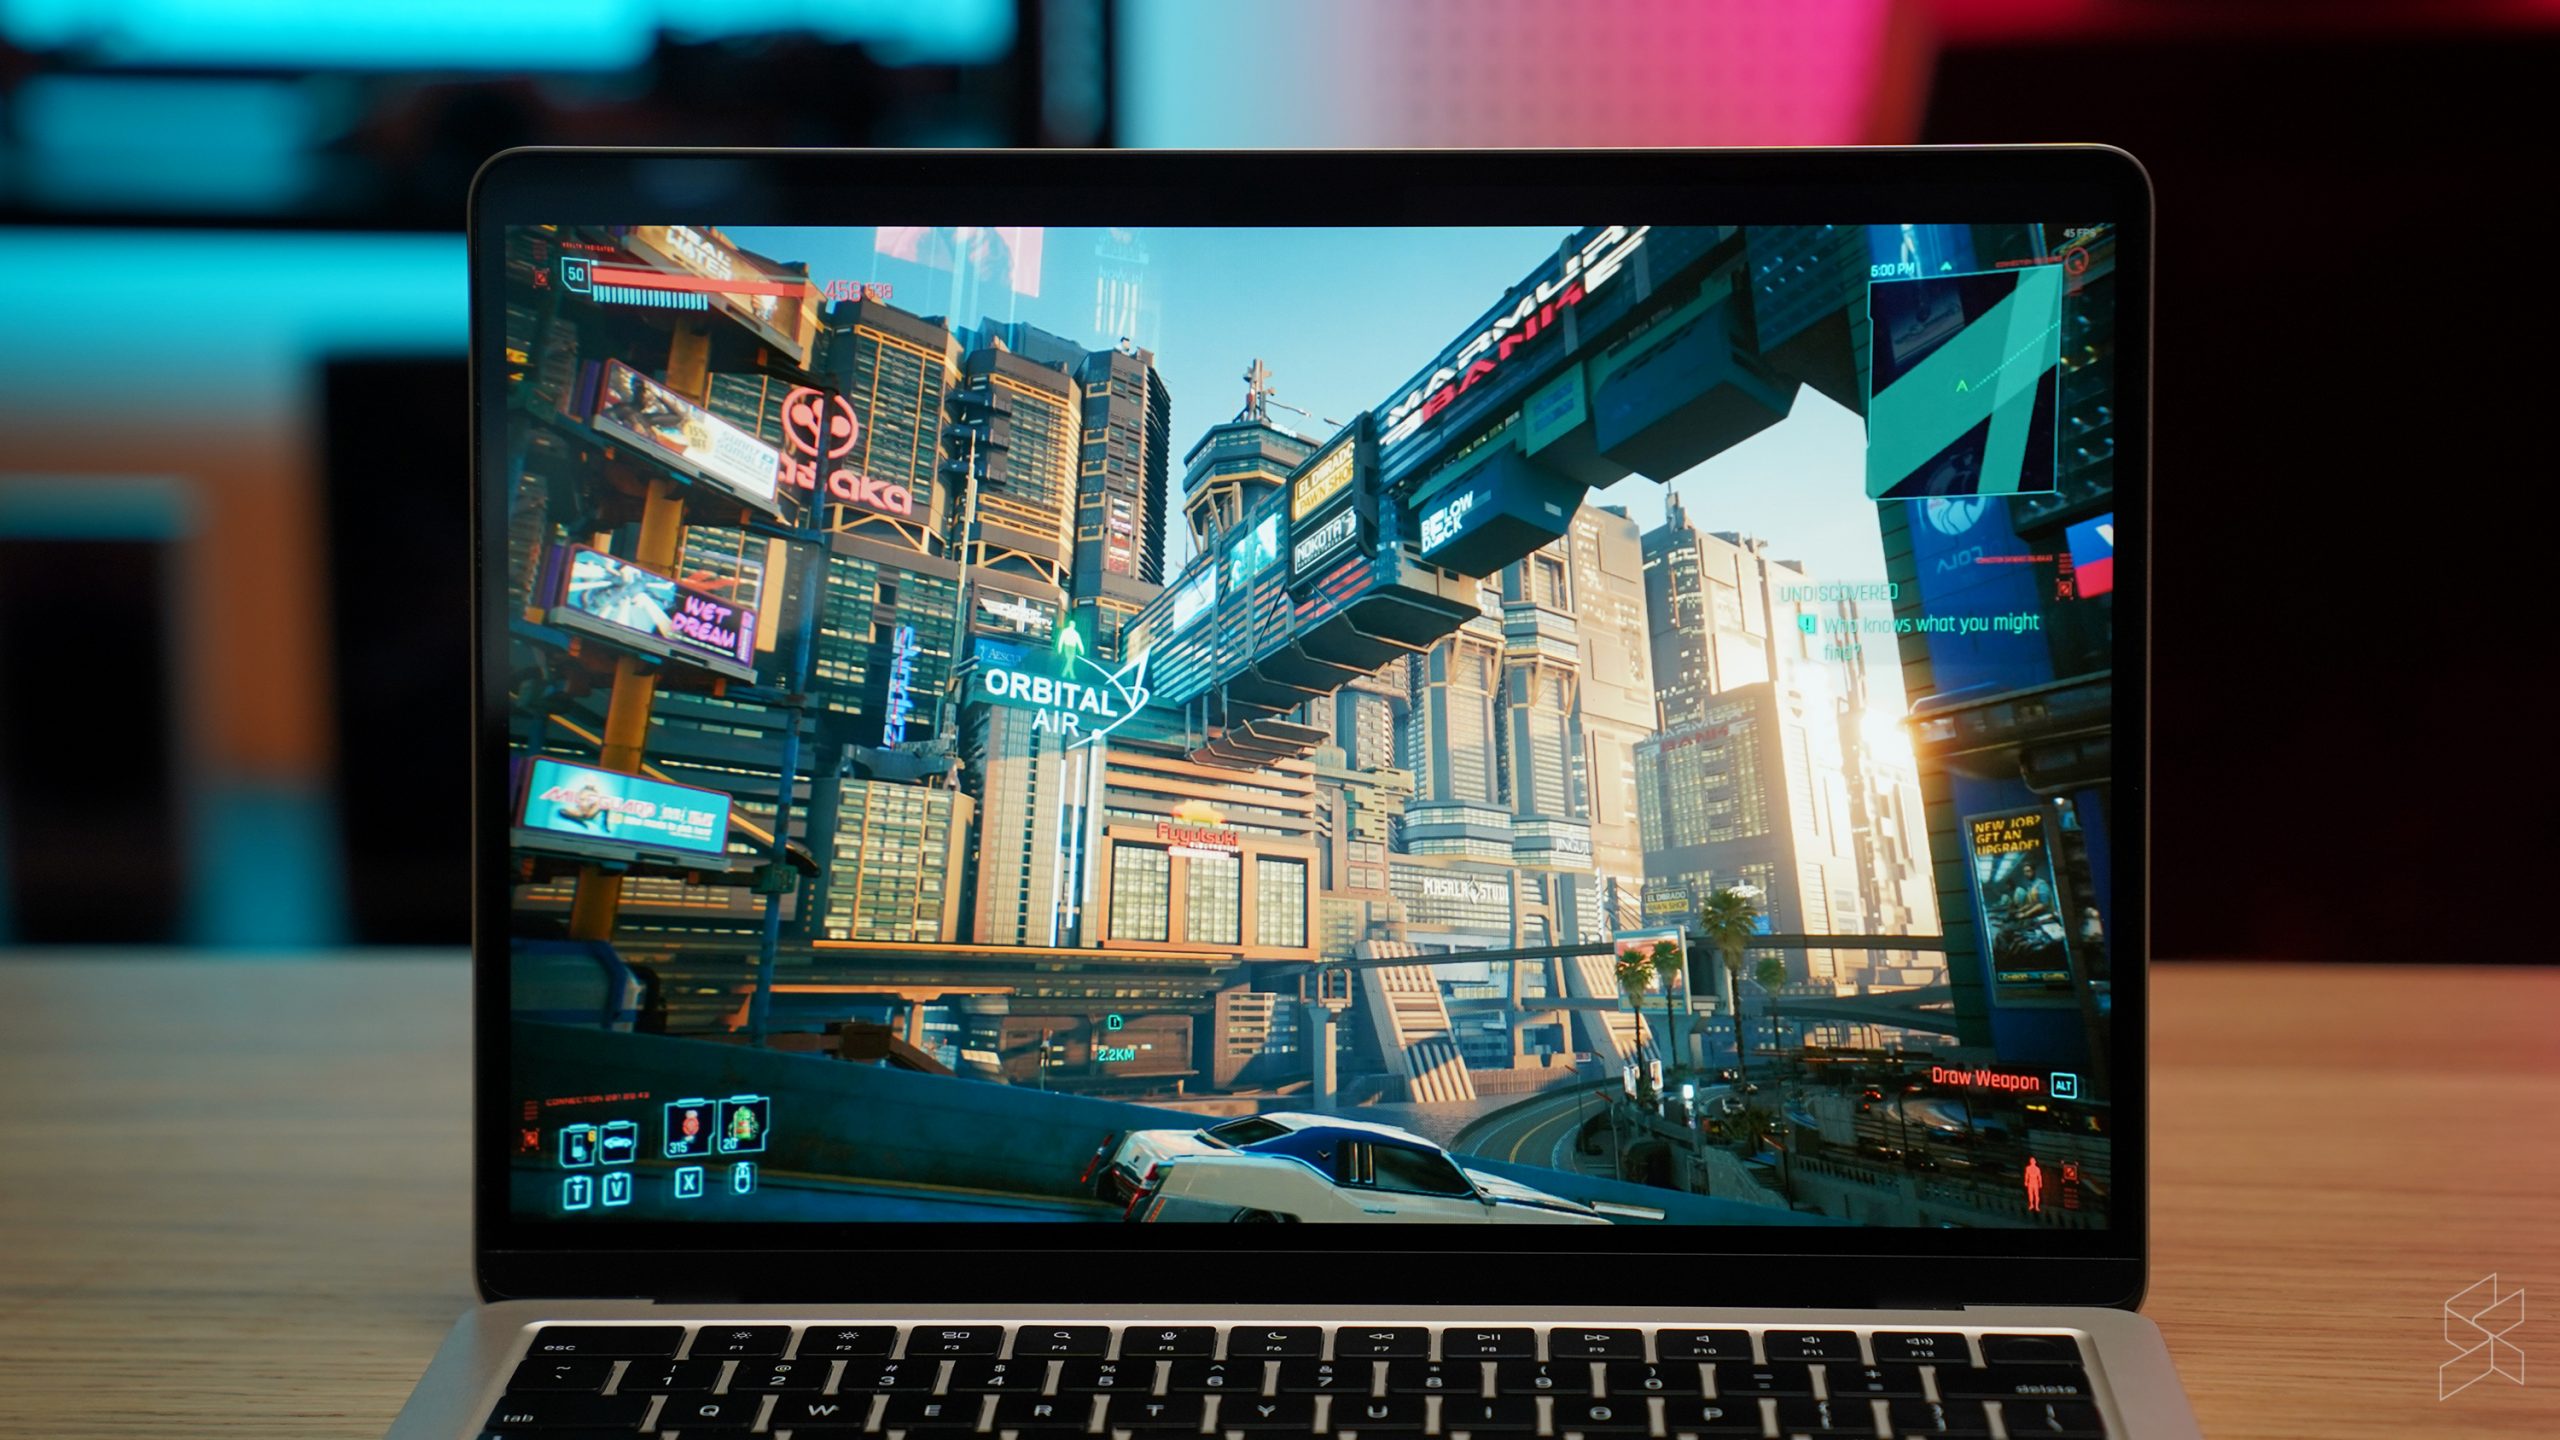 Yes 5G extends free NVIDIA GeForce Now cloud gaming beta trial until